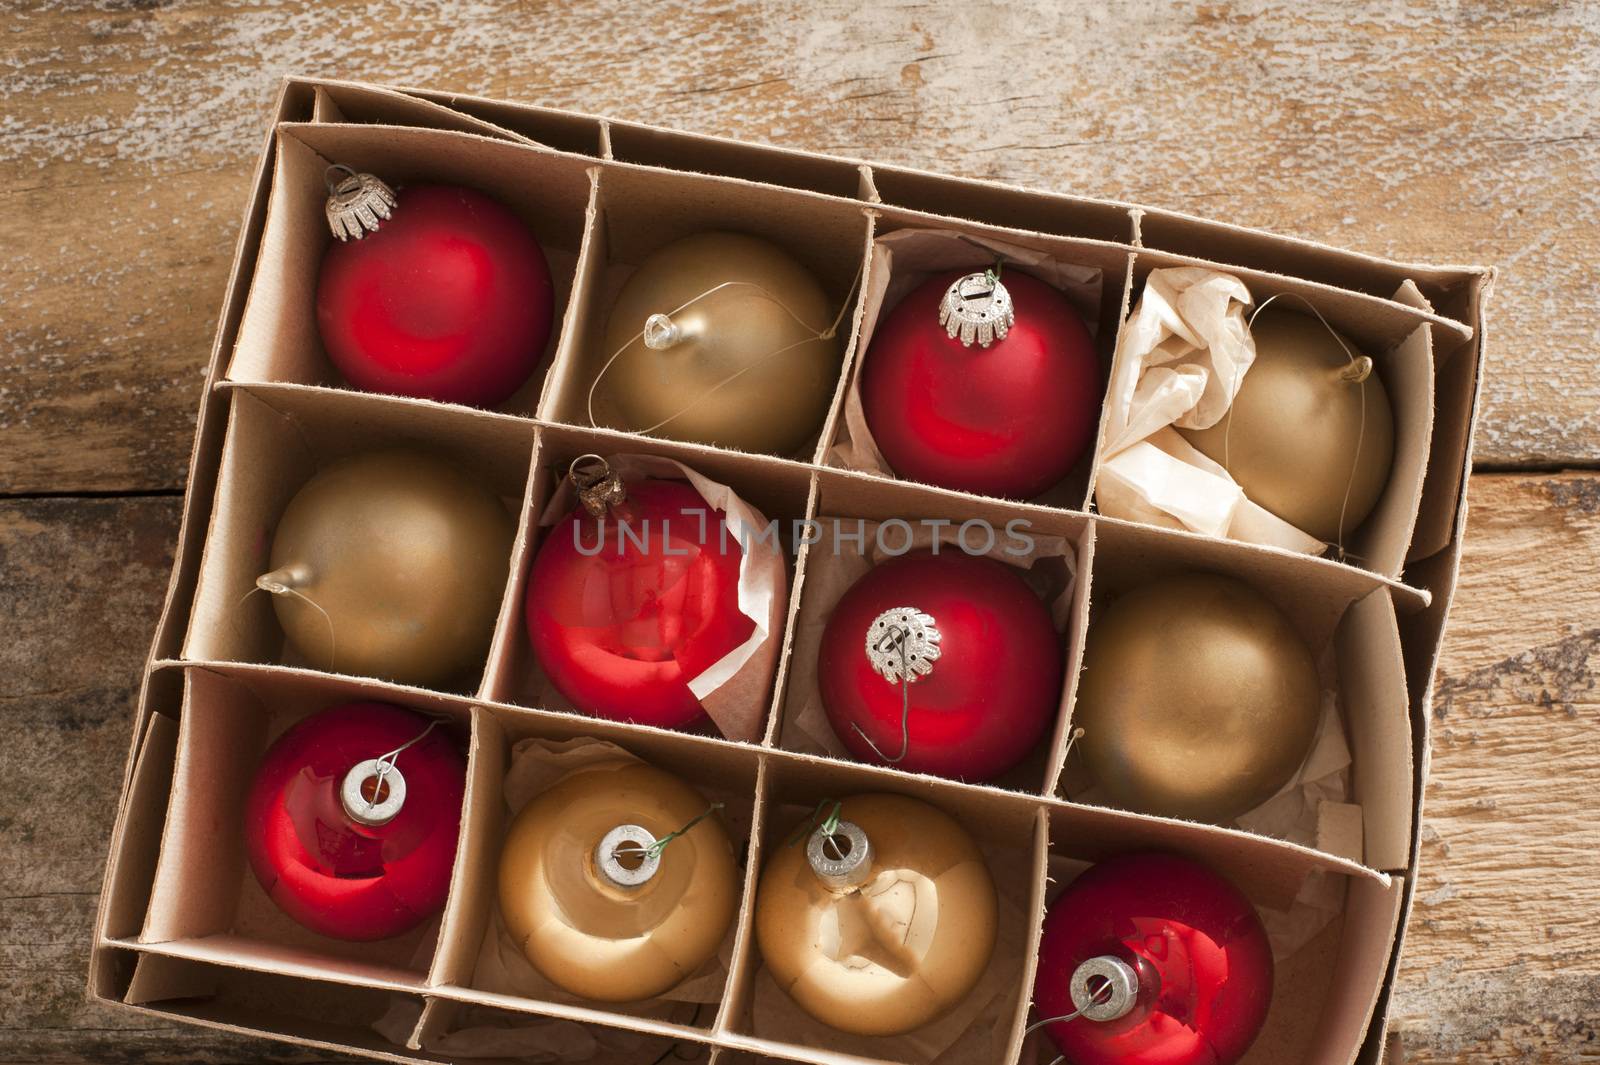 Cardboard carton of red and gold Christmas balls ready to decorate the house for the festive holiday season viewed from above on a rustic wood table